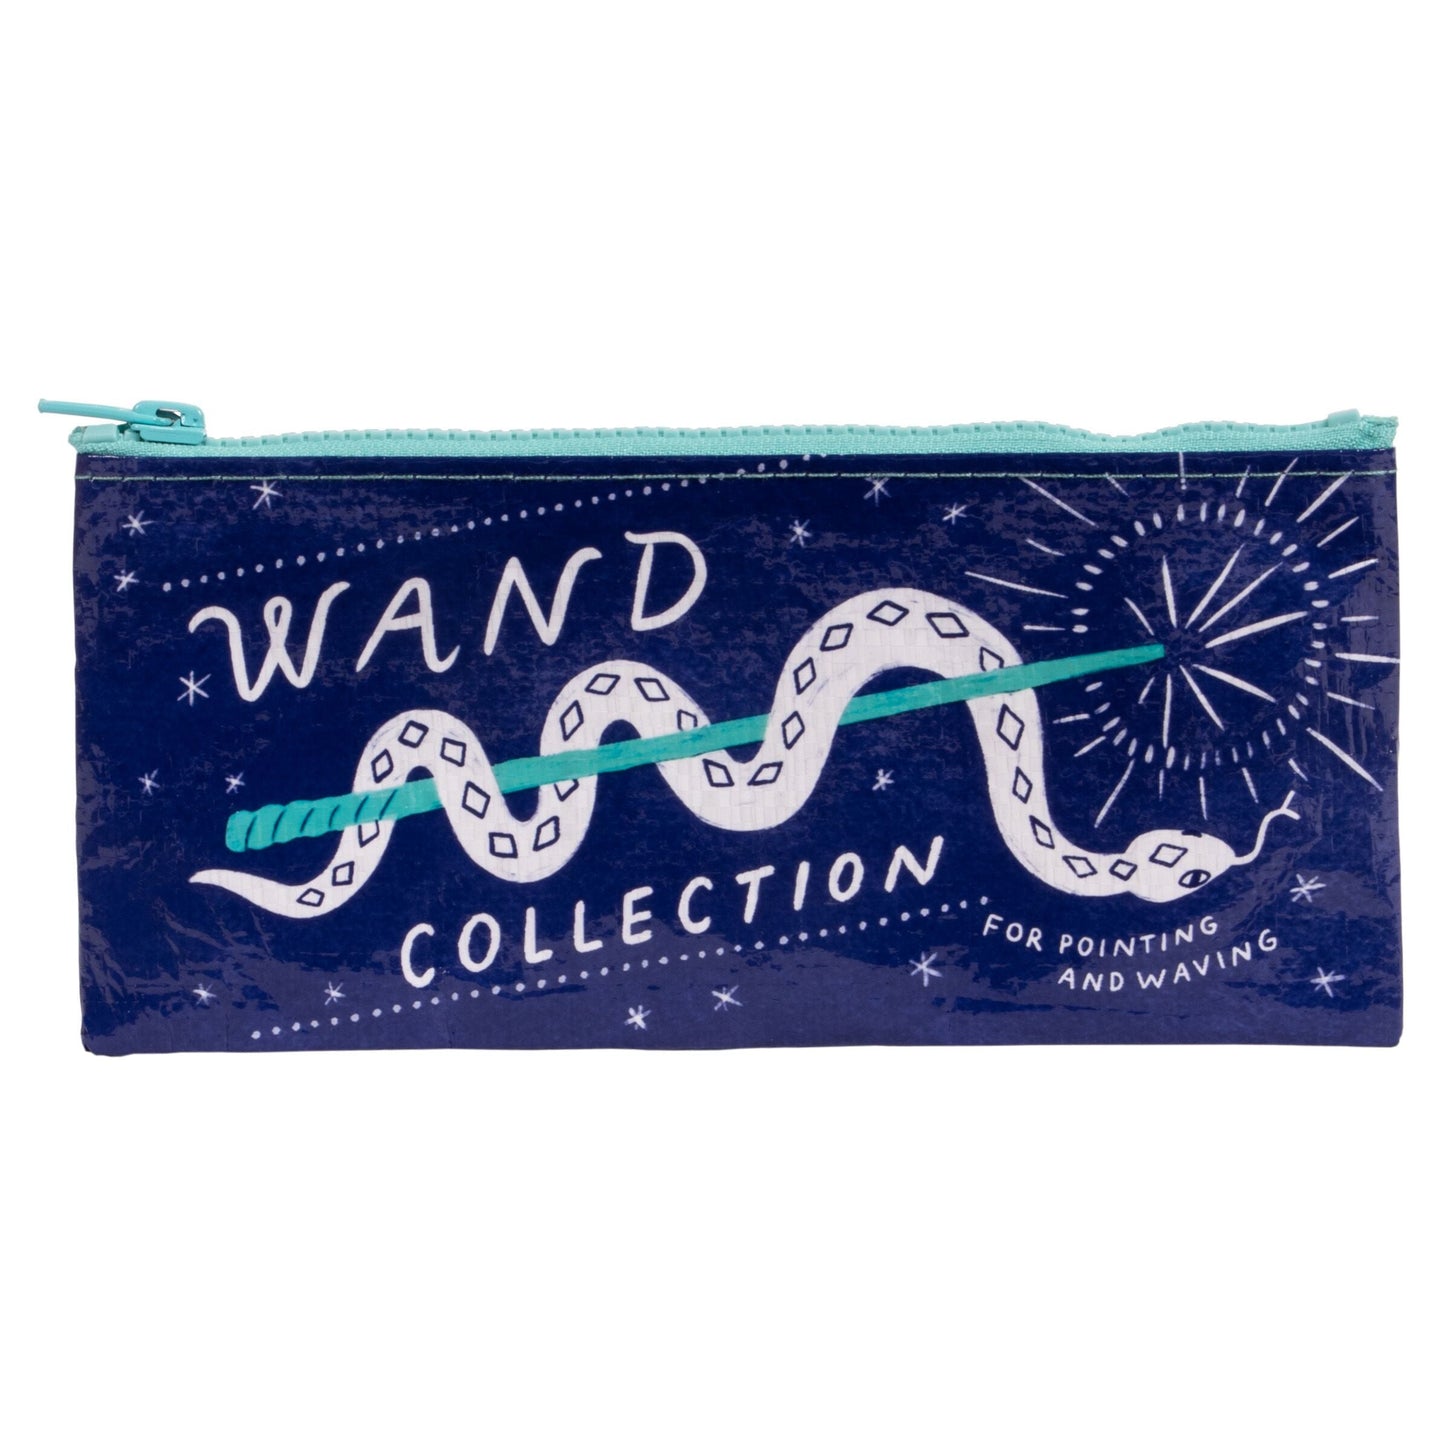 Wand Collection For Pointing and Waving Pencil Case with Snake and Wand Design